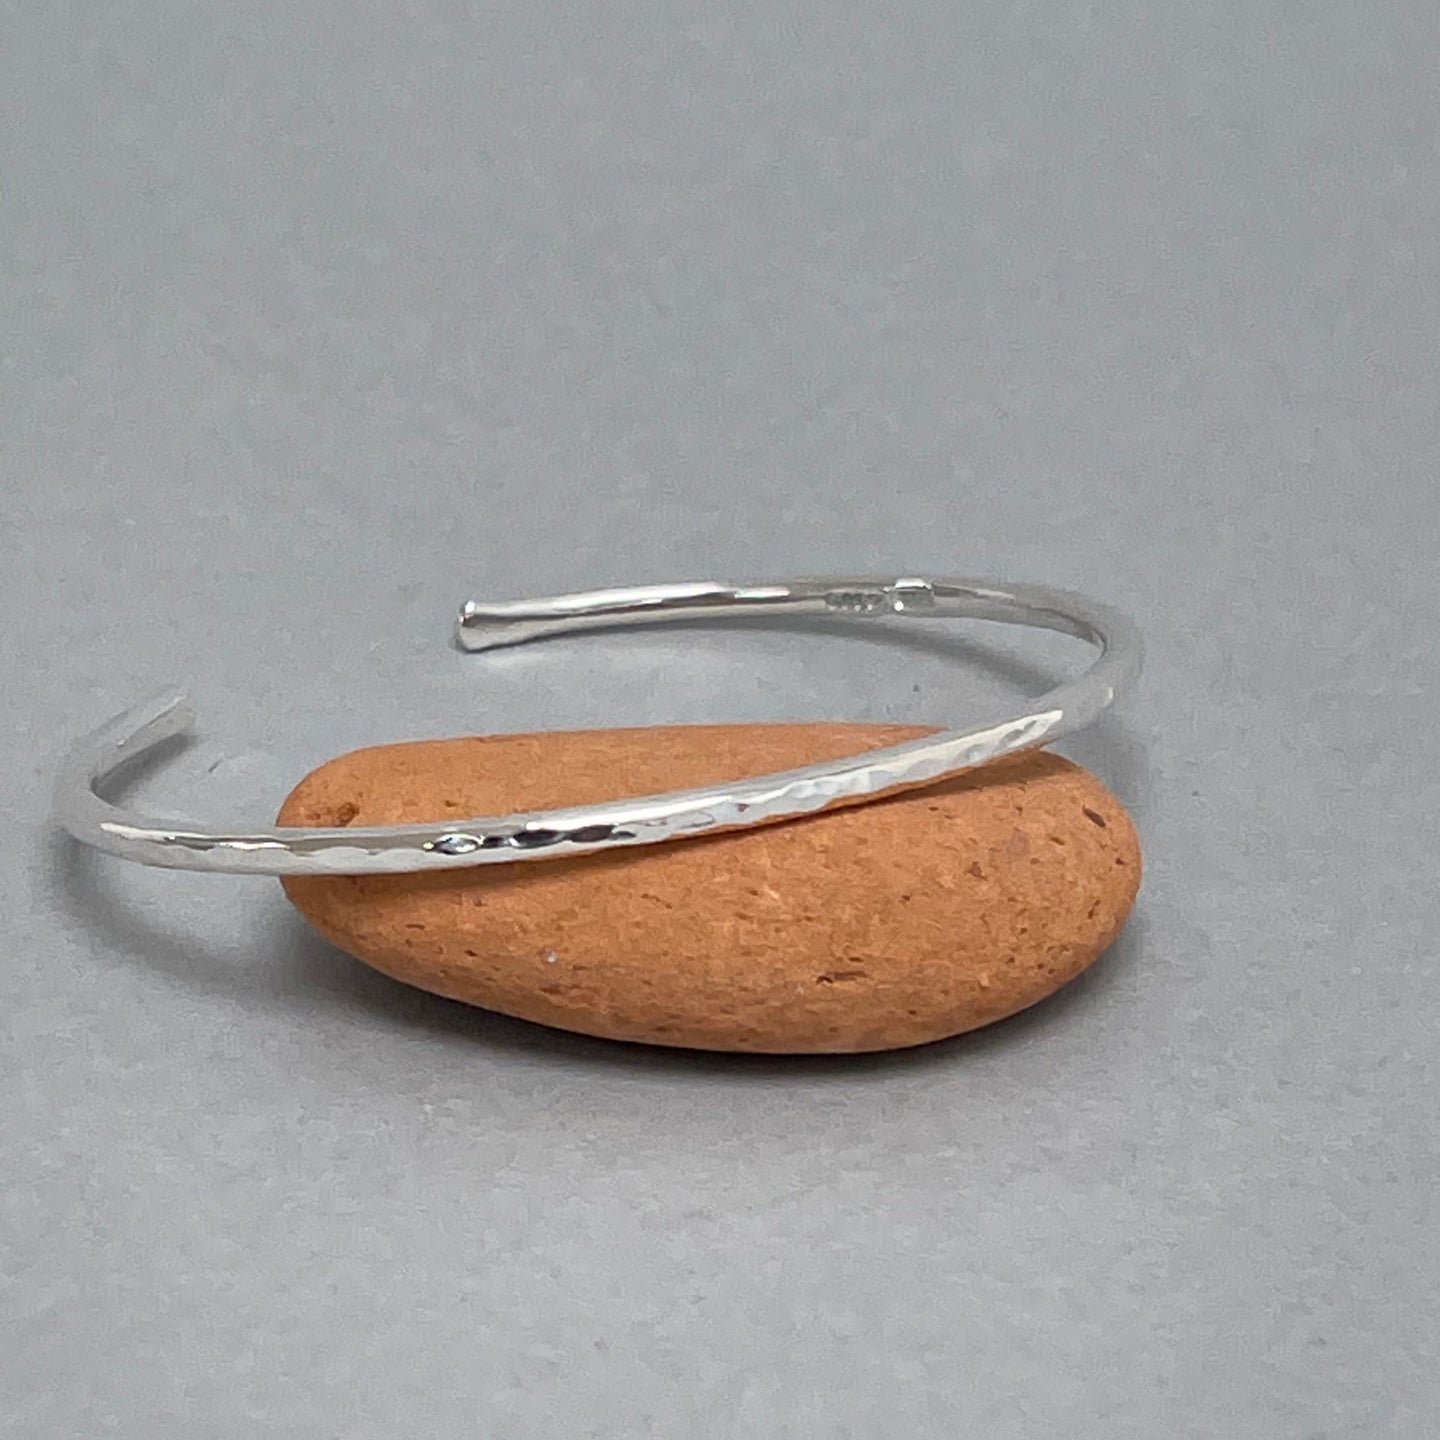 Open silver bangle - hammered